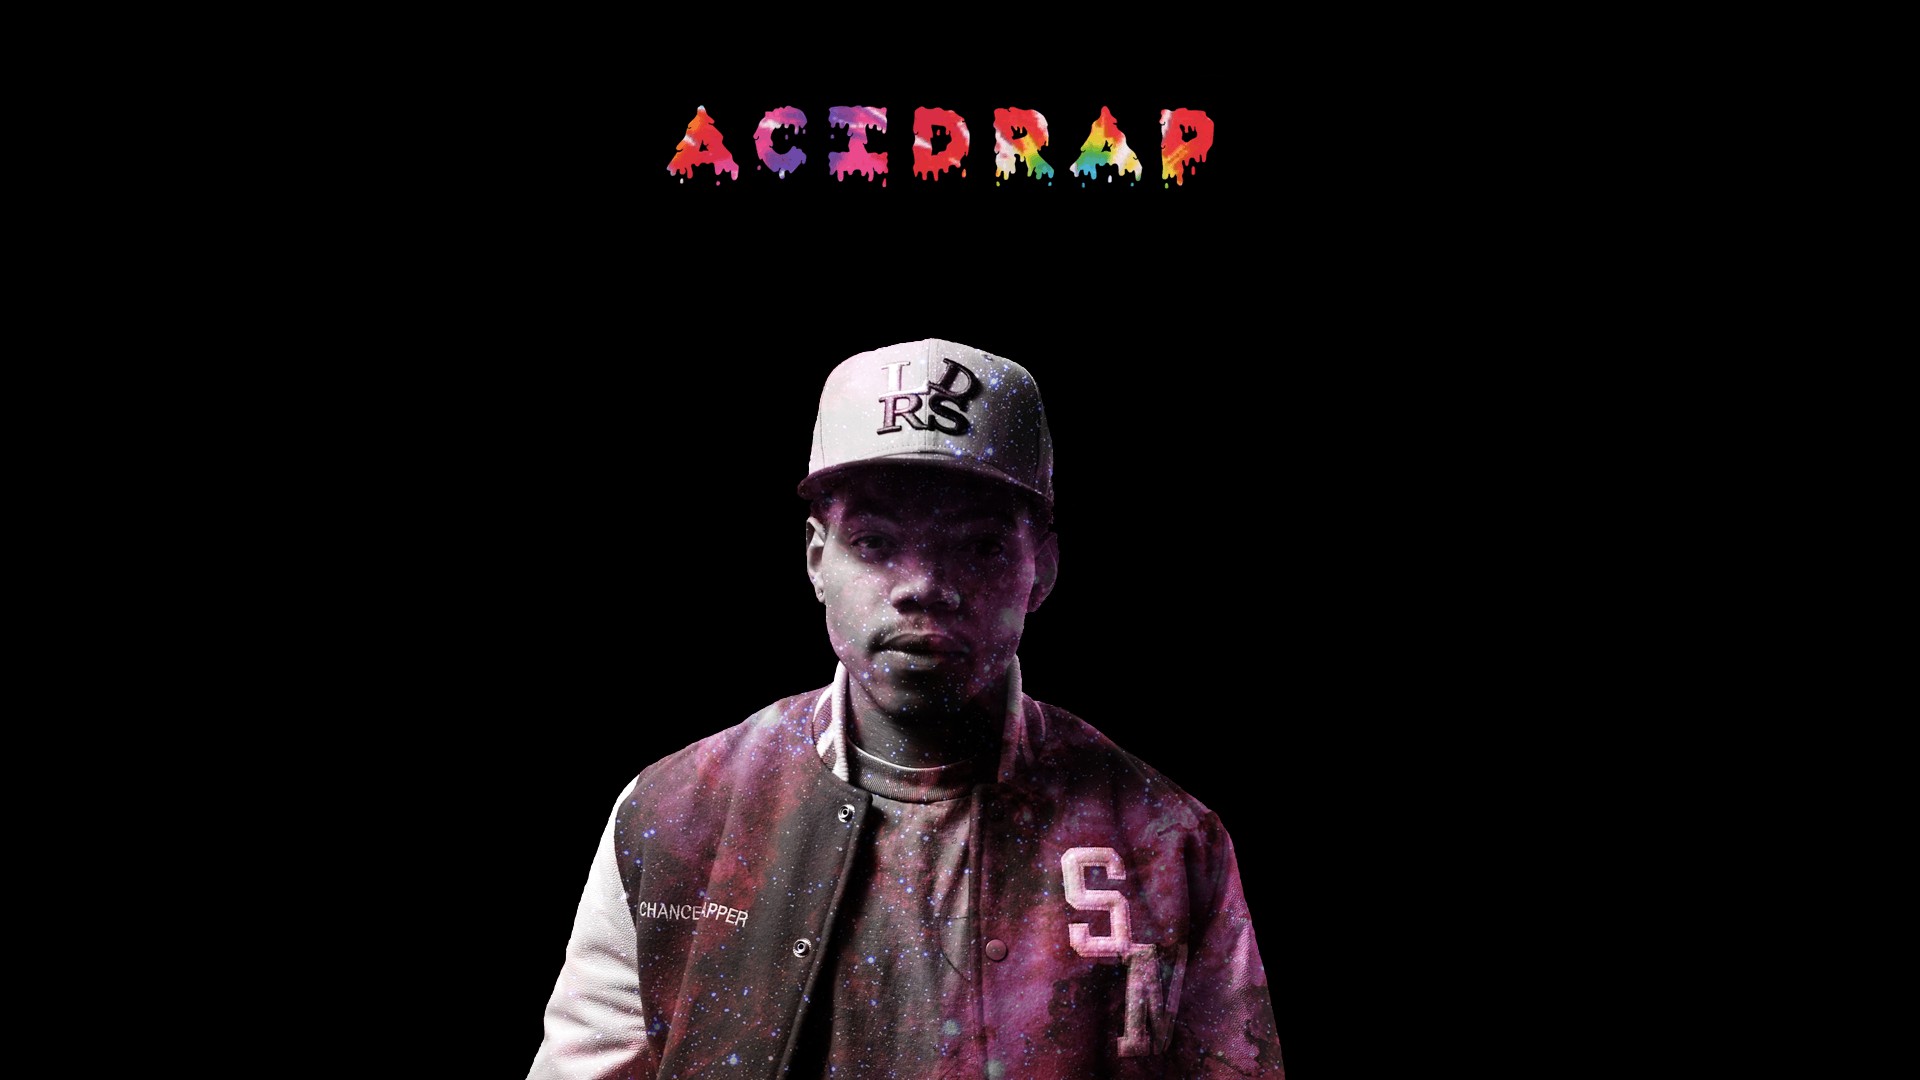 Chance the Rapper wallpaper ·① Download free full HD ...